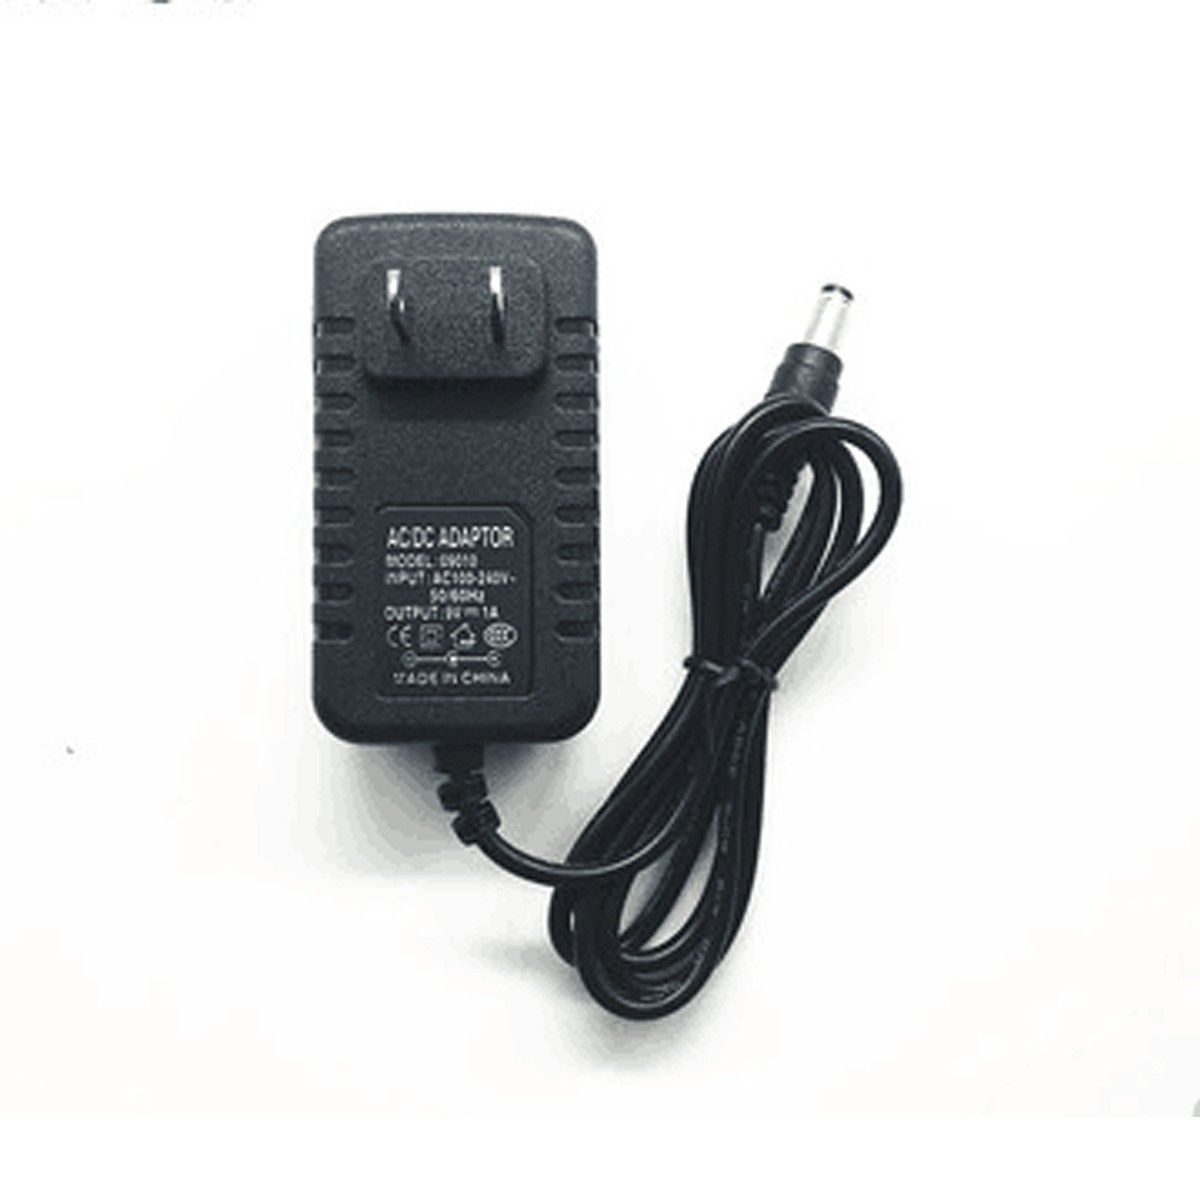 New compatible adapter for Honeywell 5828dm 5828 5828v 5V 1A 5.5